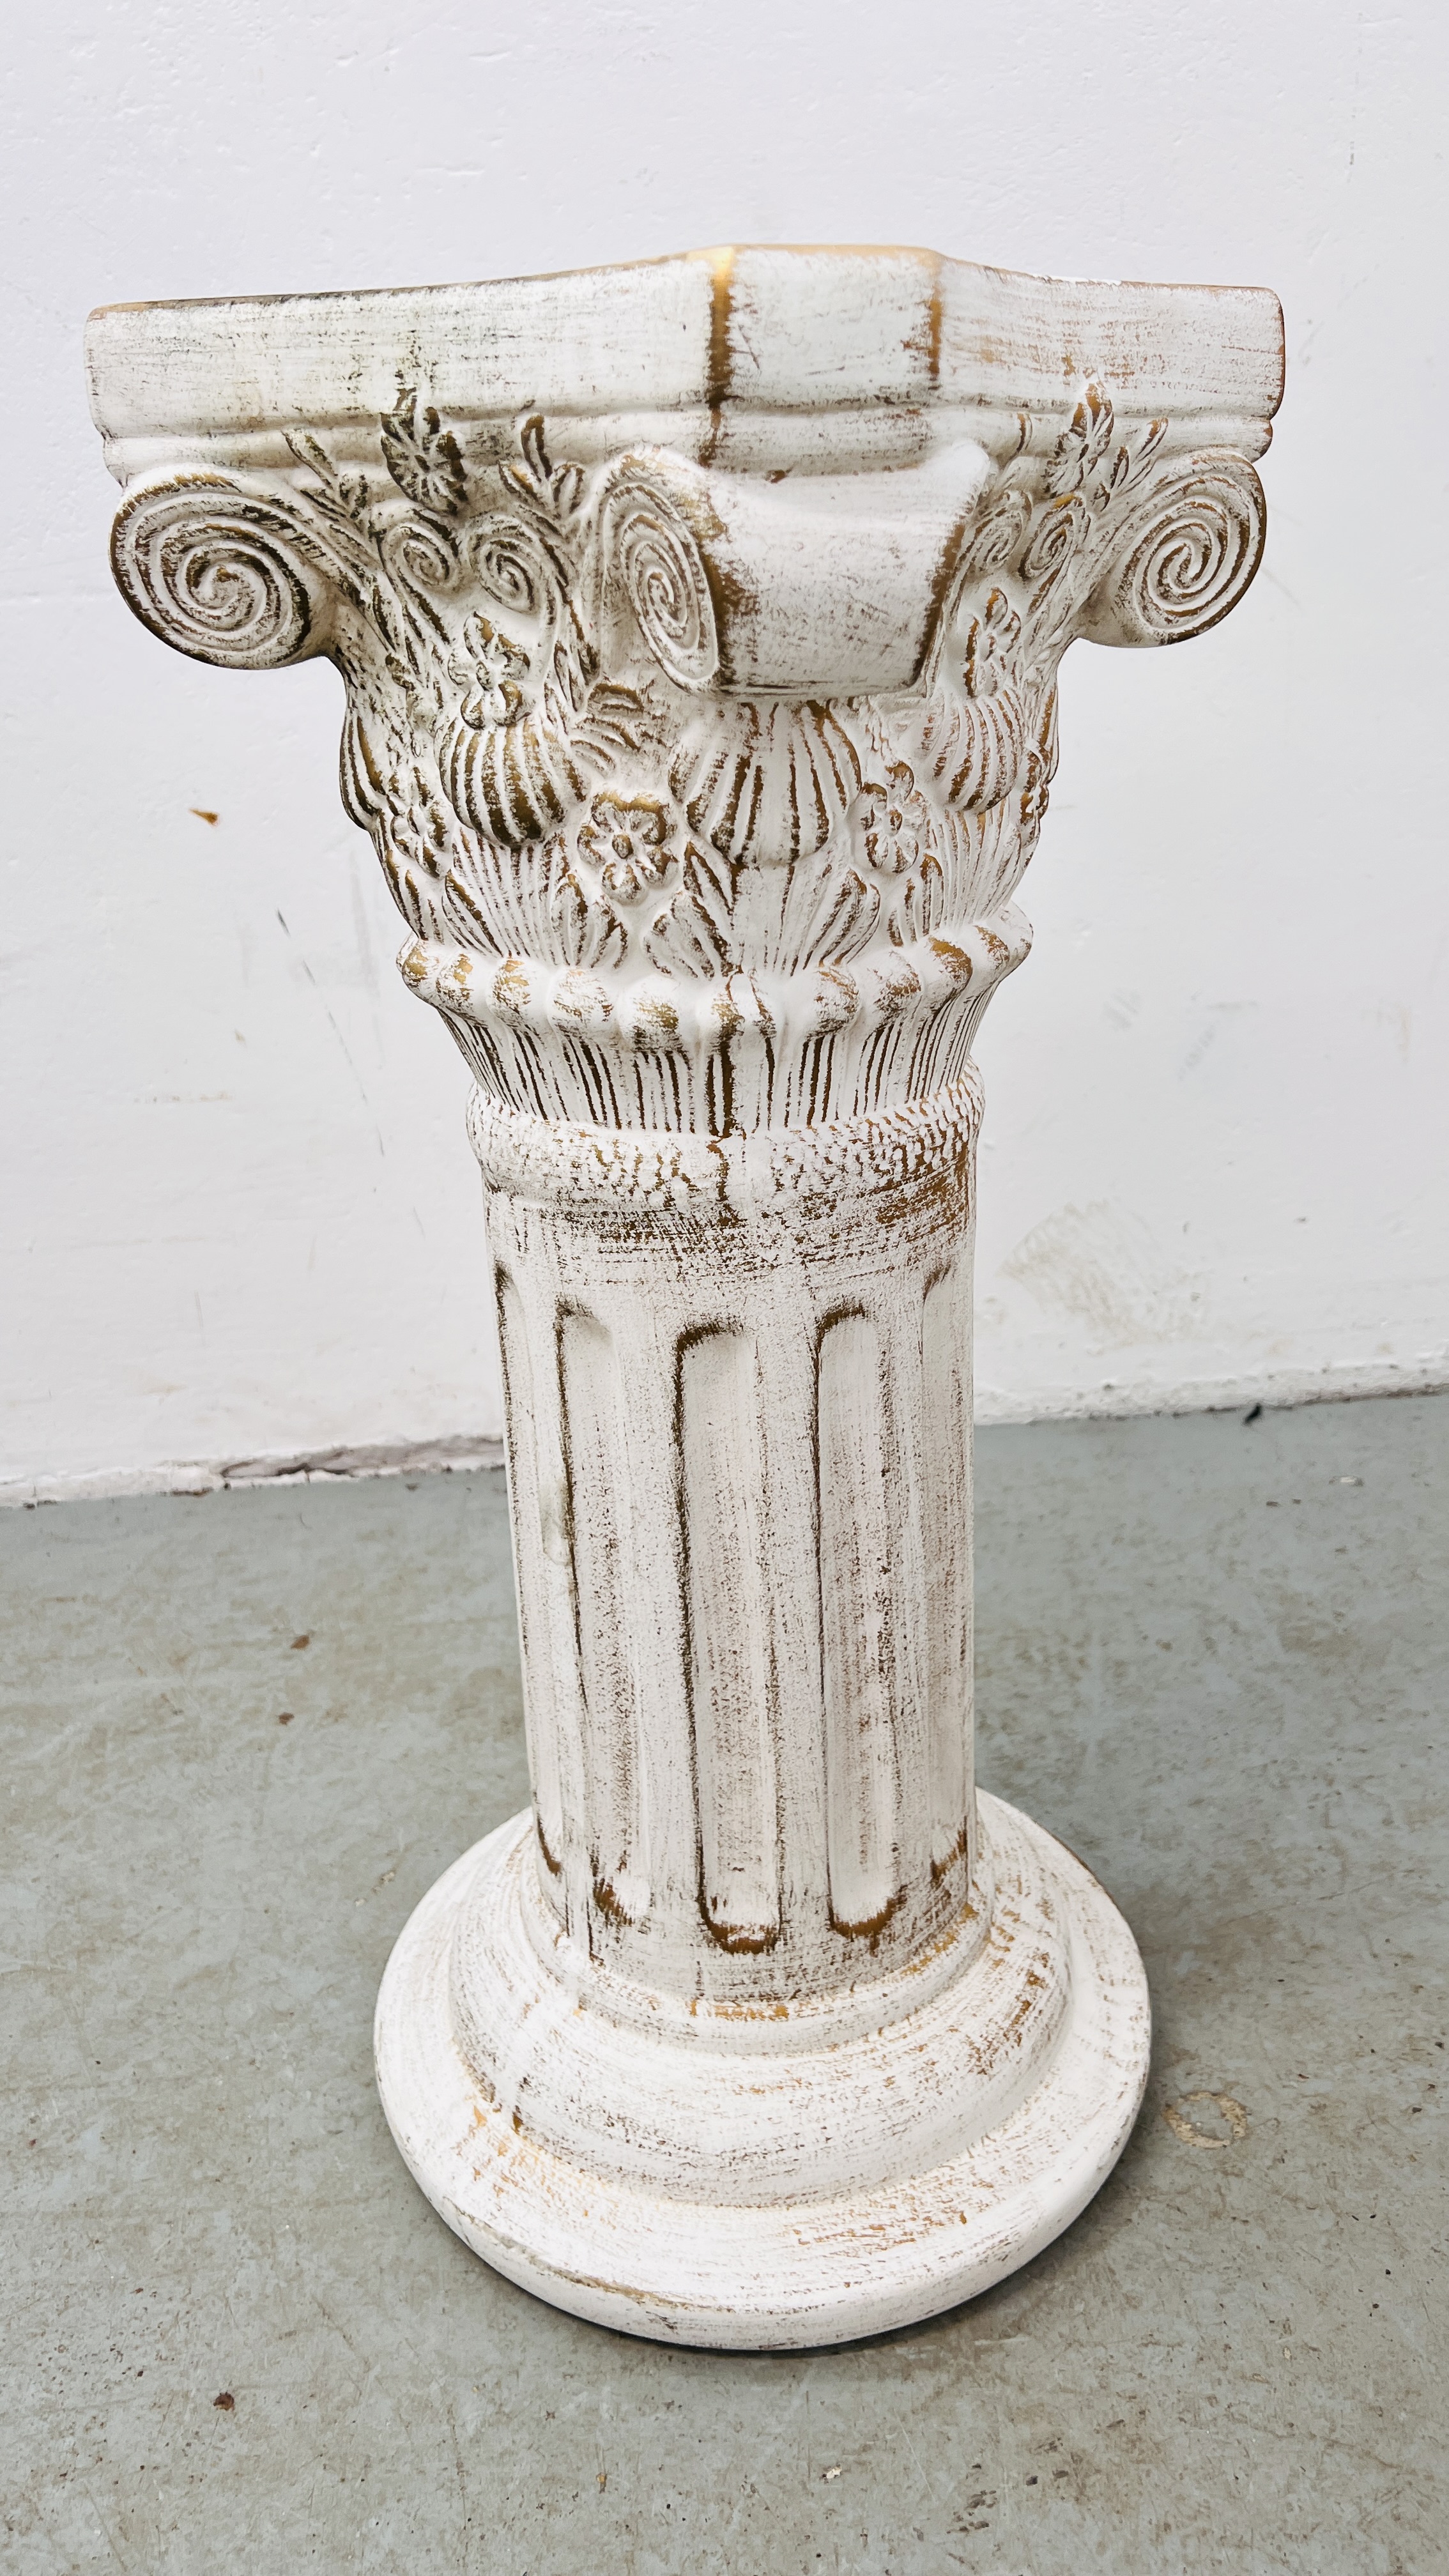 A PAIR OF REPRODUCTION COLUMN PEDESTAL STANDS, H 61CM. - Image 7 of 9